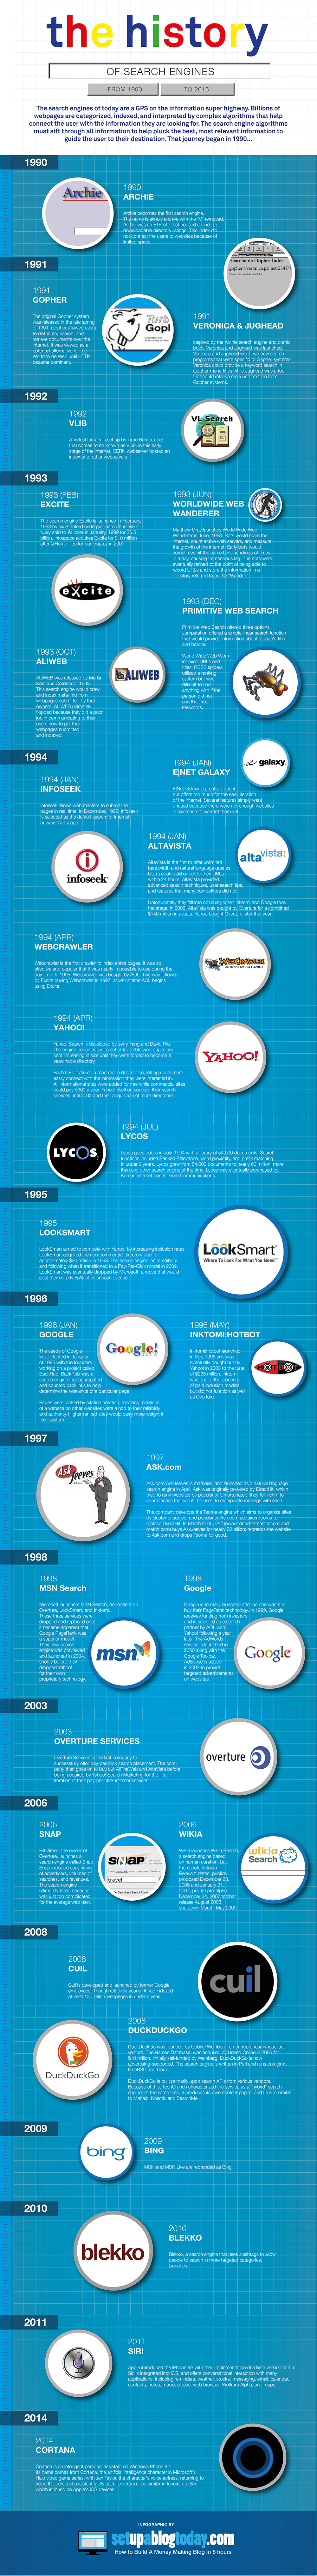 search-engine-history-infographic1.jpg